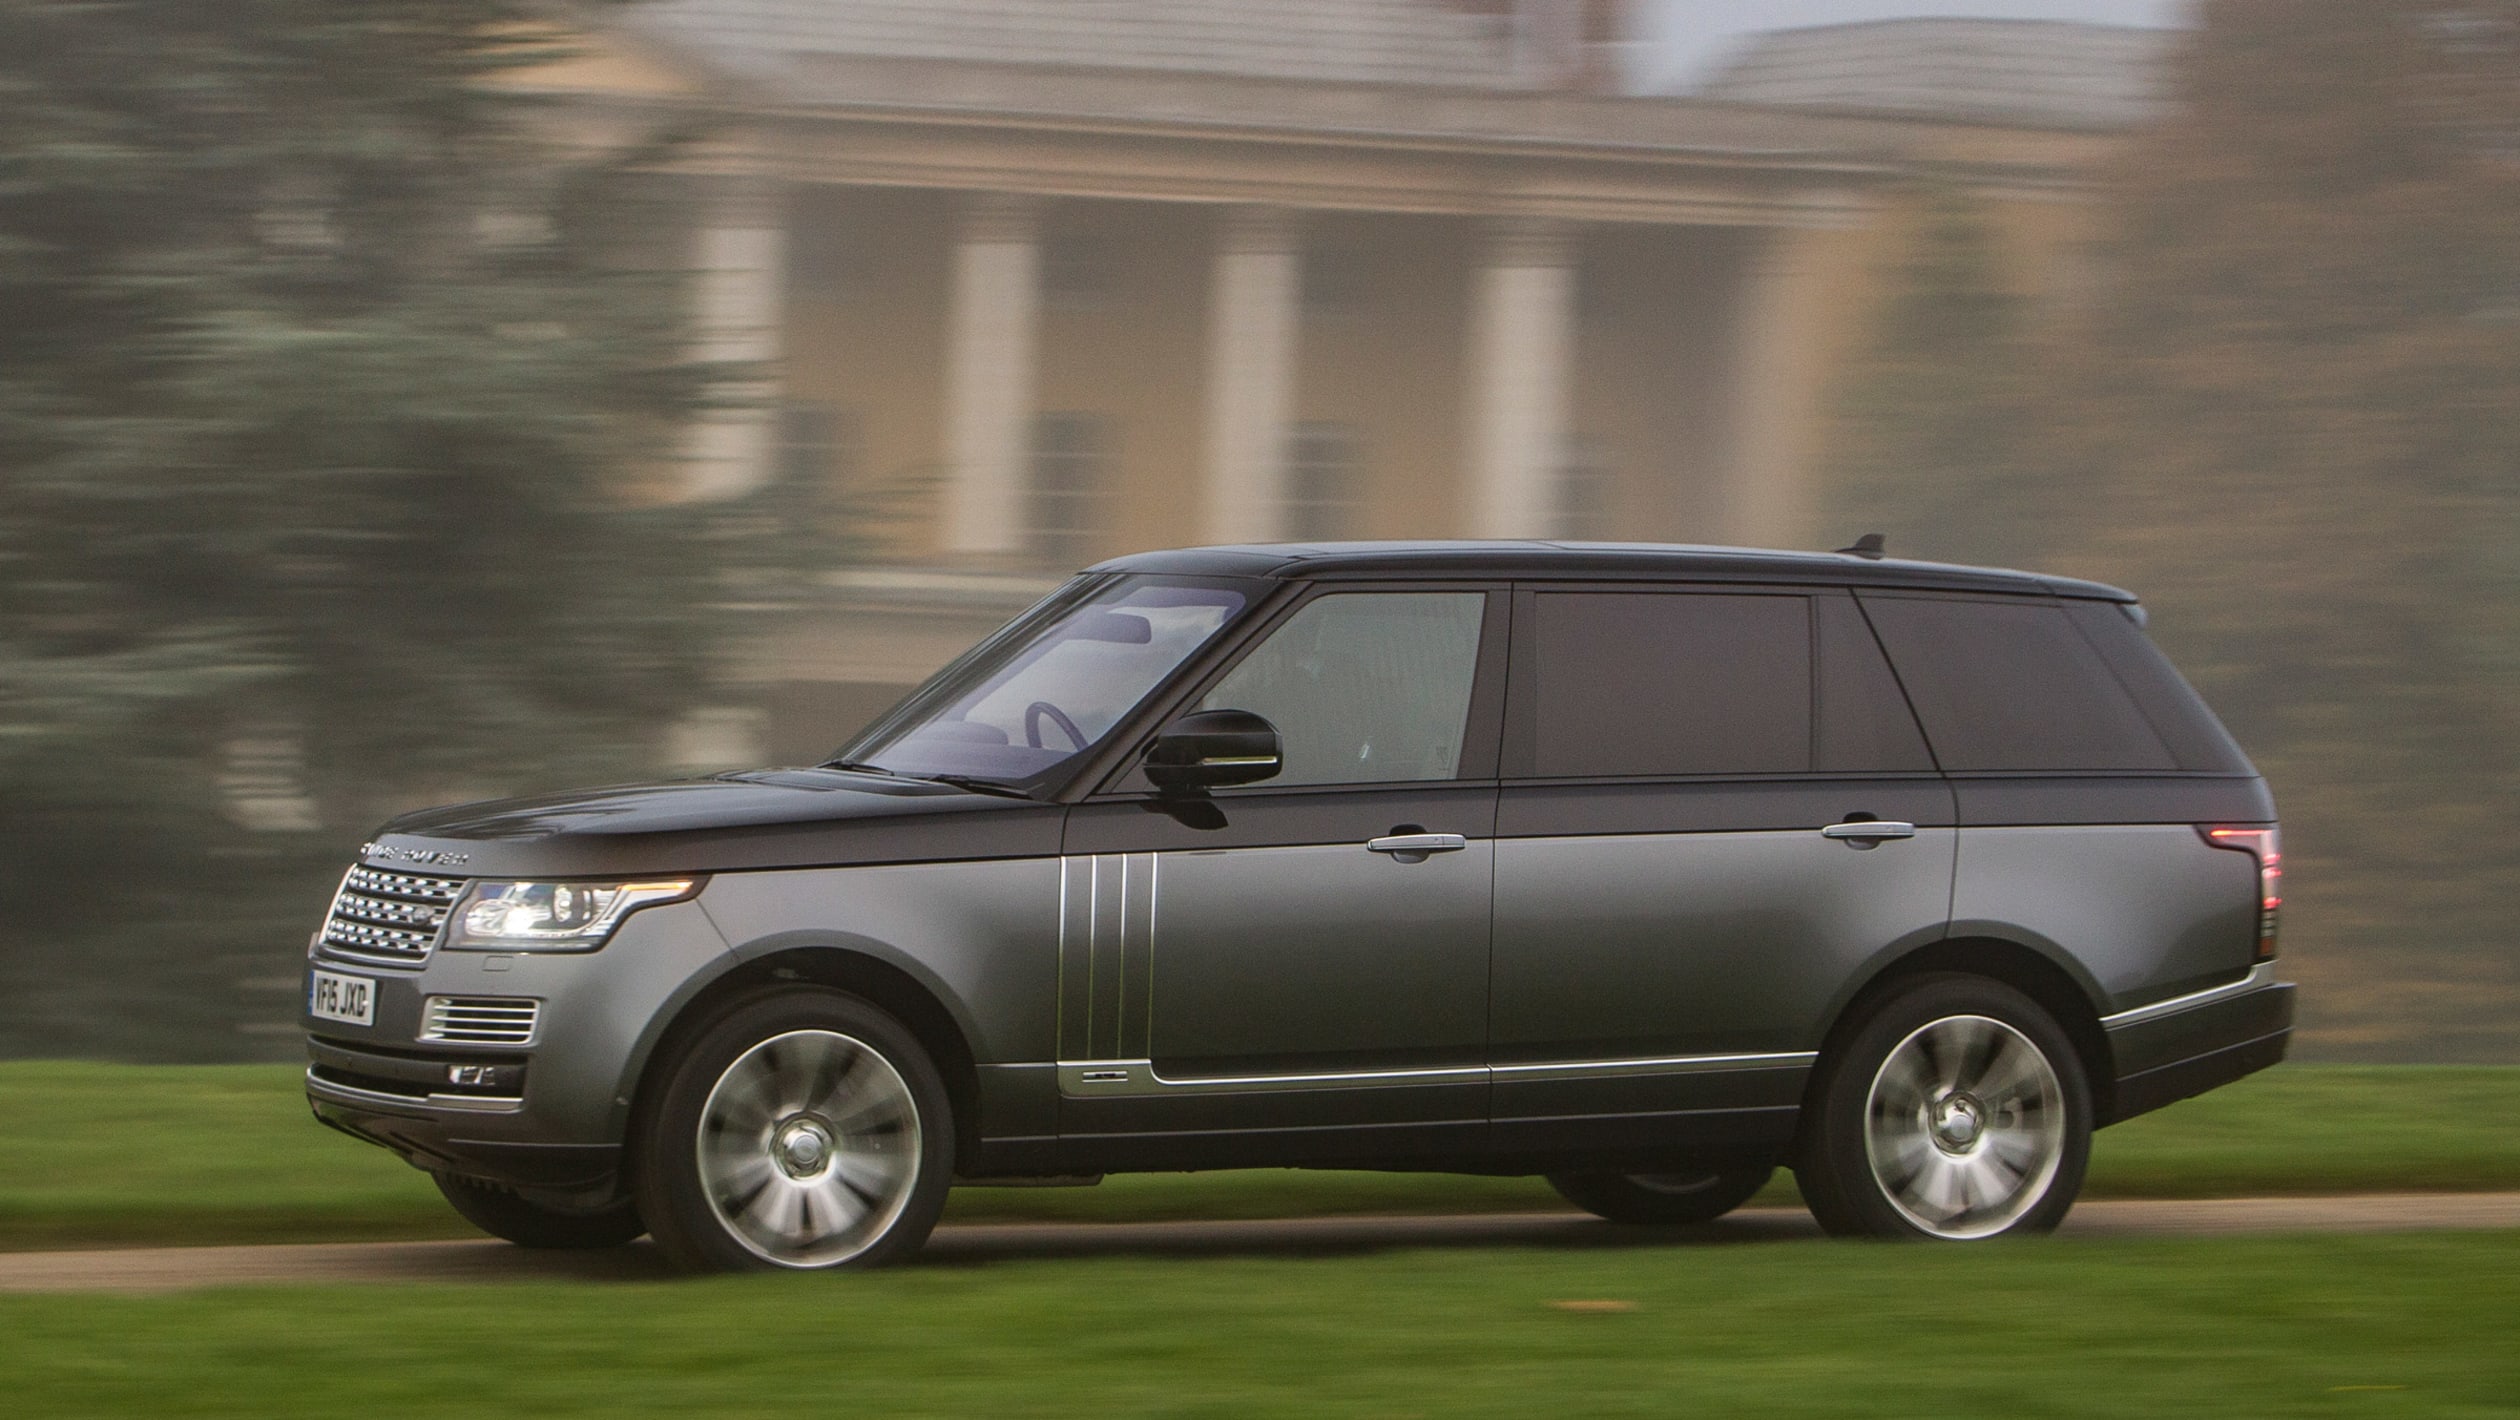 Range Rover SV-Autobiography LWB - pictures | Auto Express